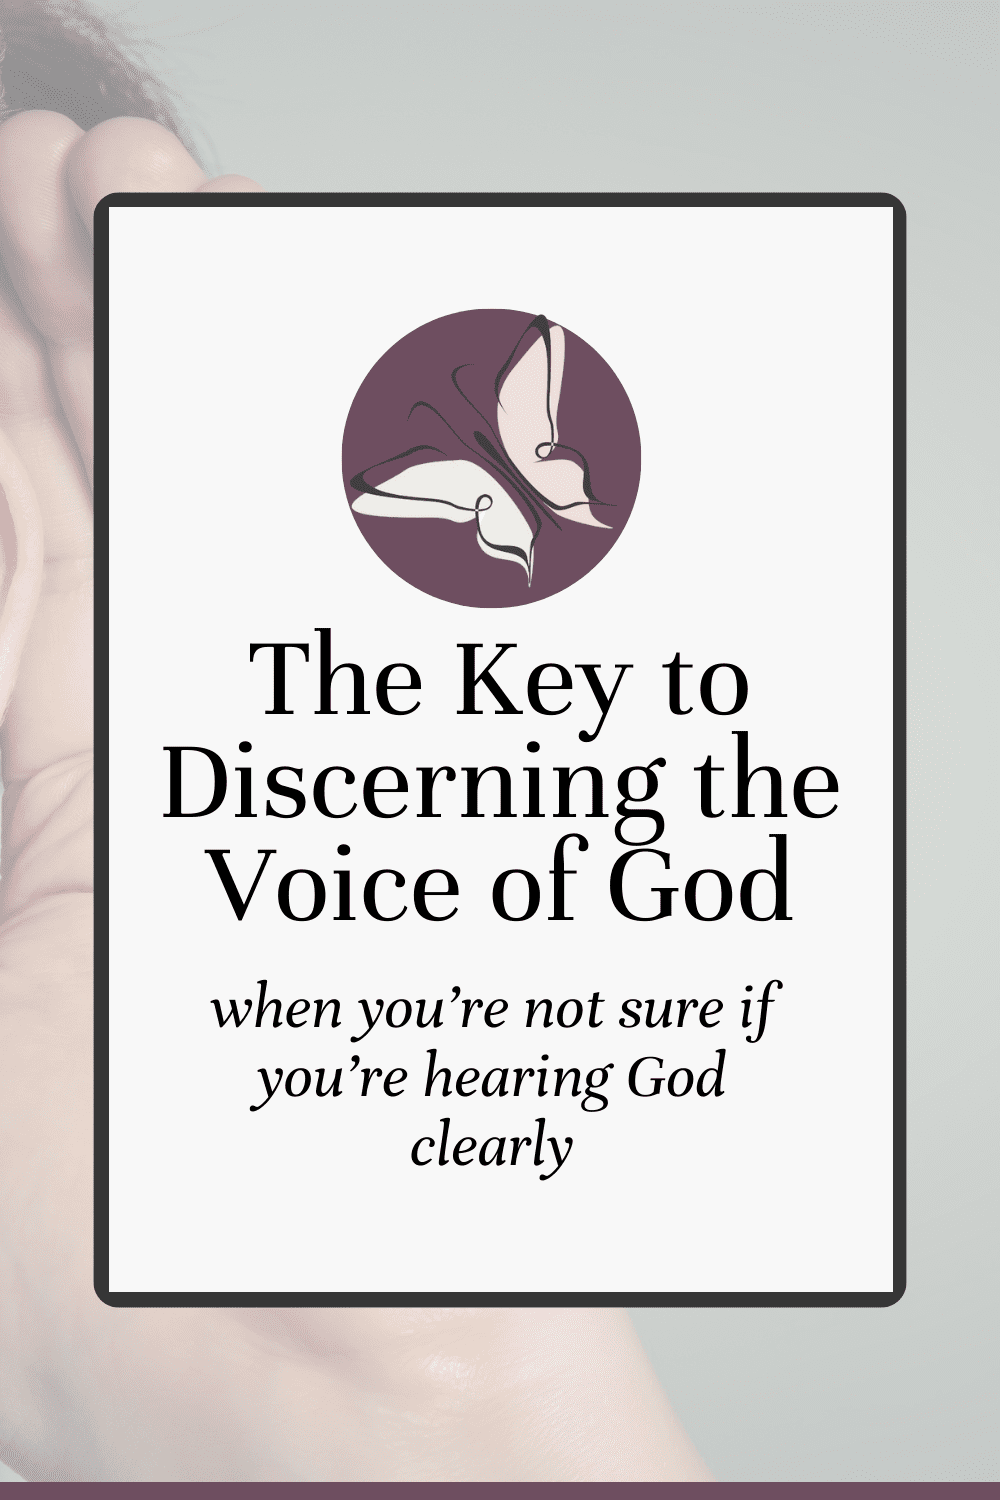 Are you tired of wondering if you're hearing God's voice or just your own thoughts? Learn the different kinds of voices you might hear plus how to hear God's voice and be confident about it.